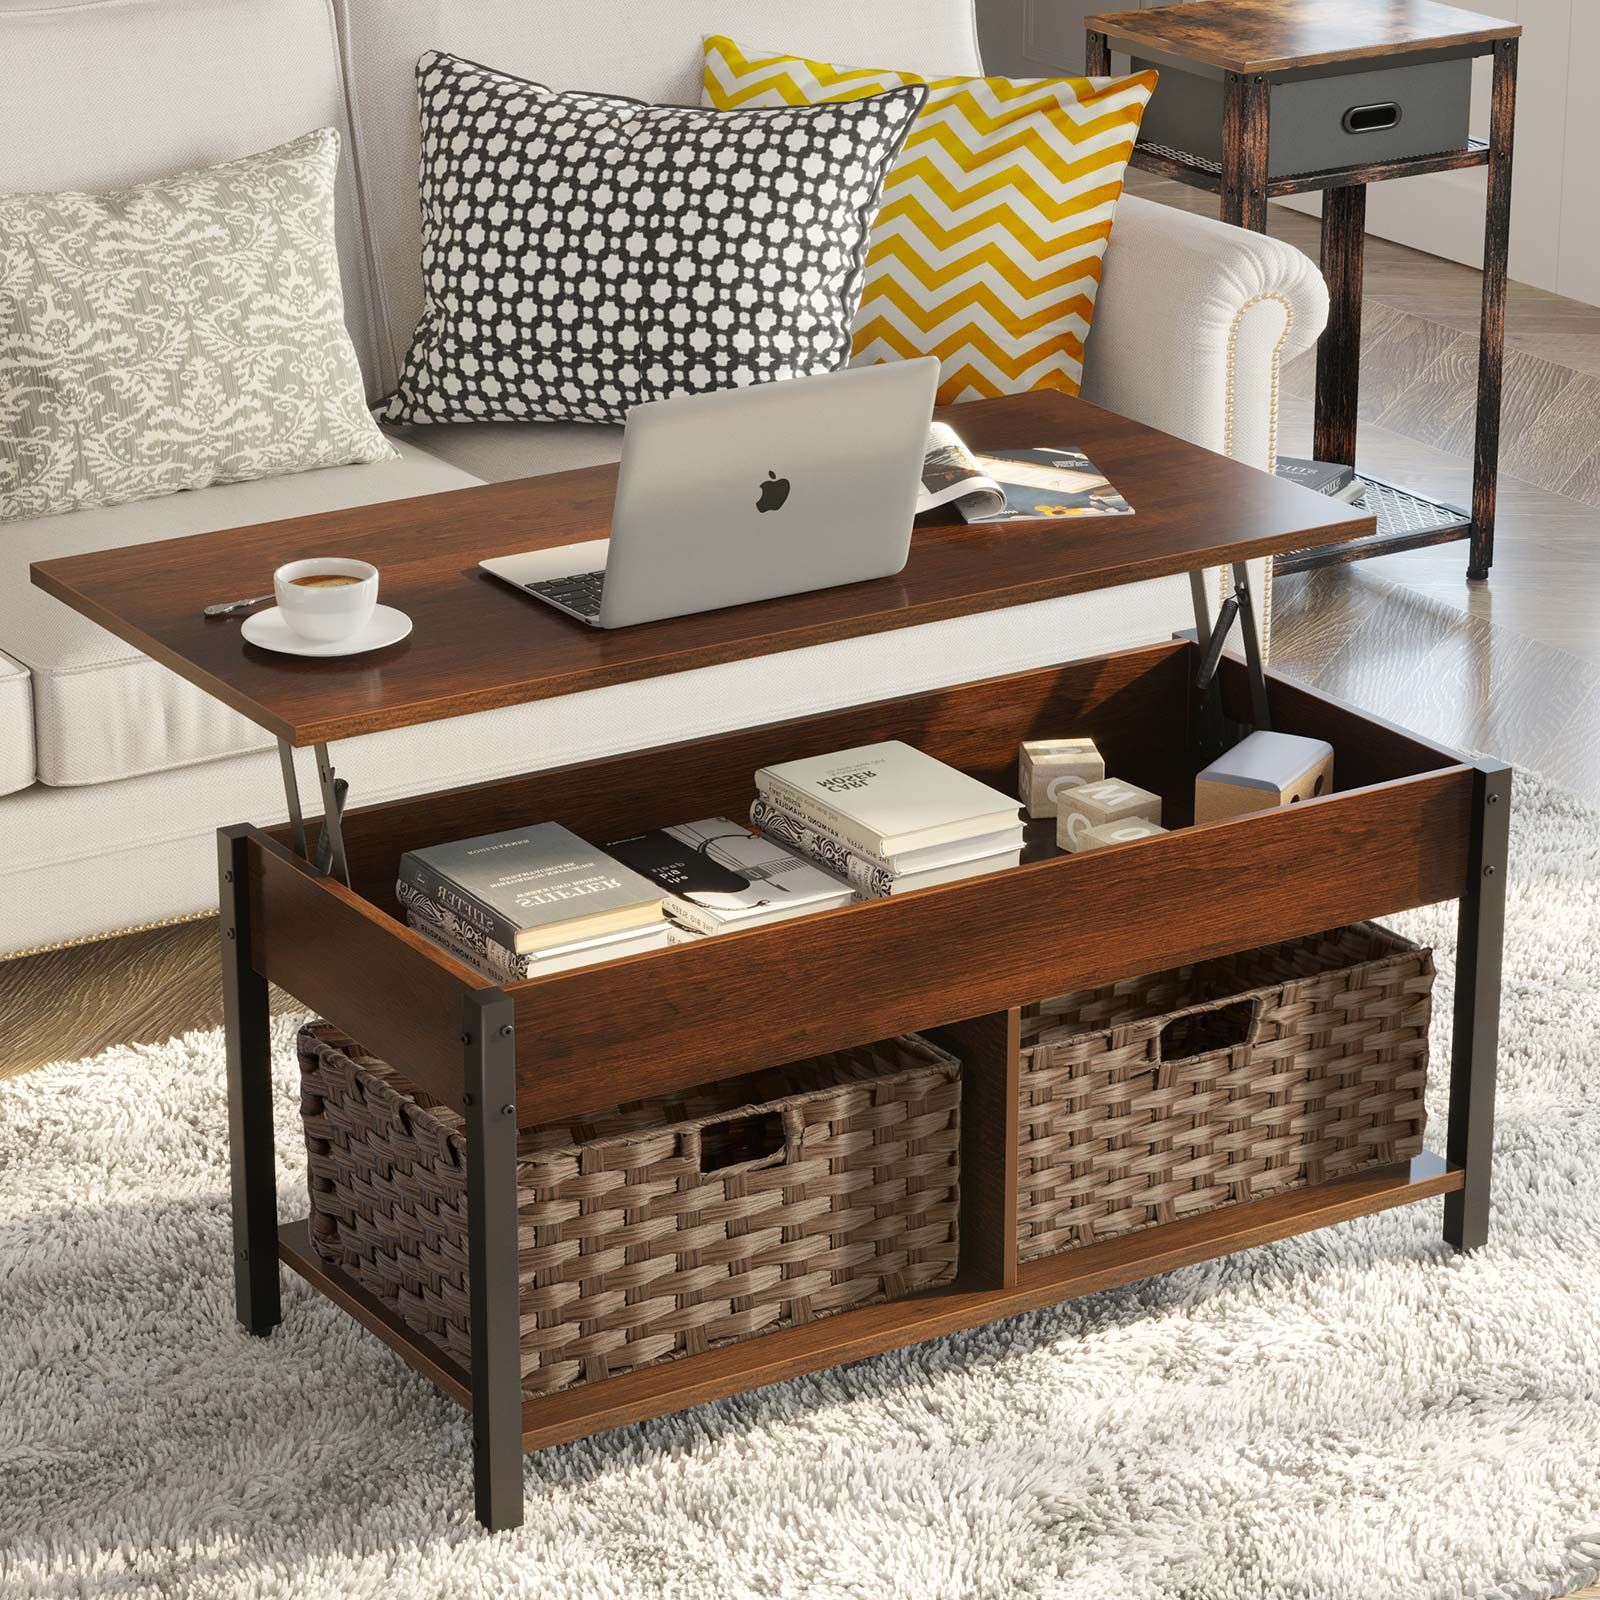 Favorite Lift Top Coffee Tables With Shelves Intended For Rolanstar Coffee Table, Lift Top Coffee Table With Storage Shelves And (View 7 of 15)